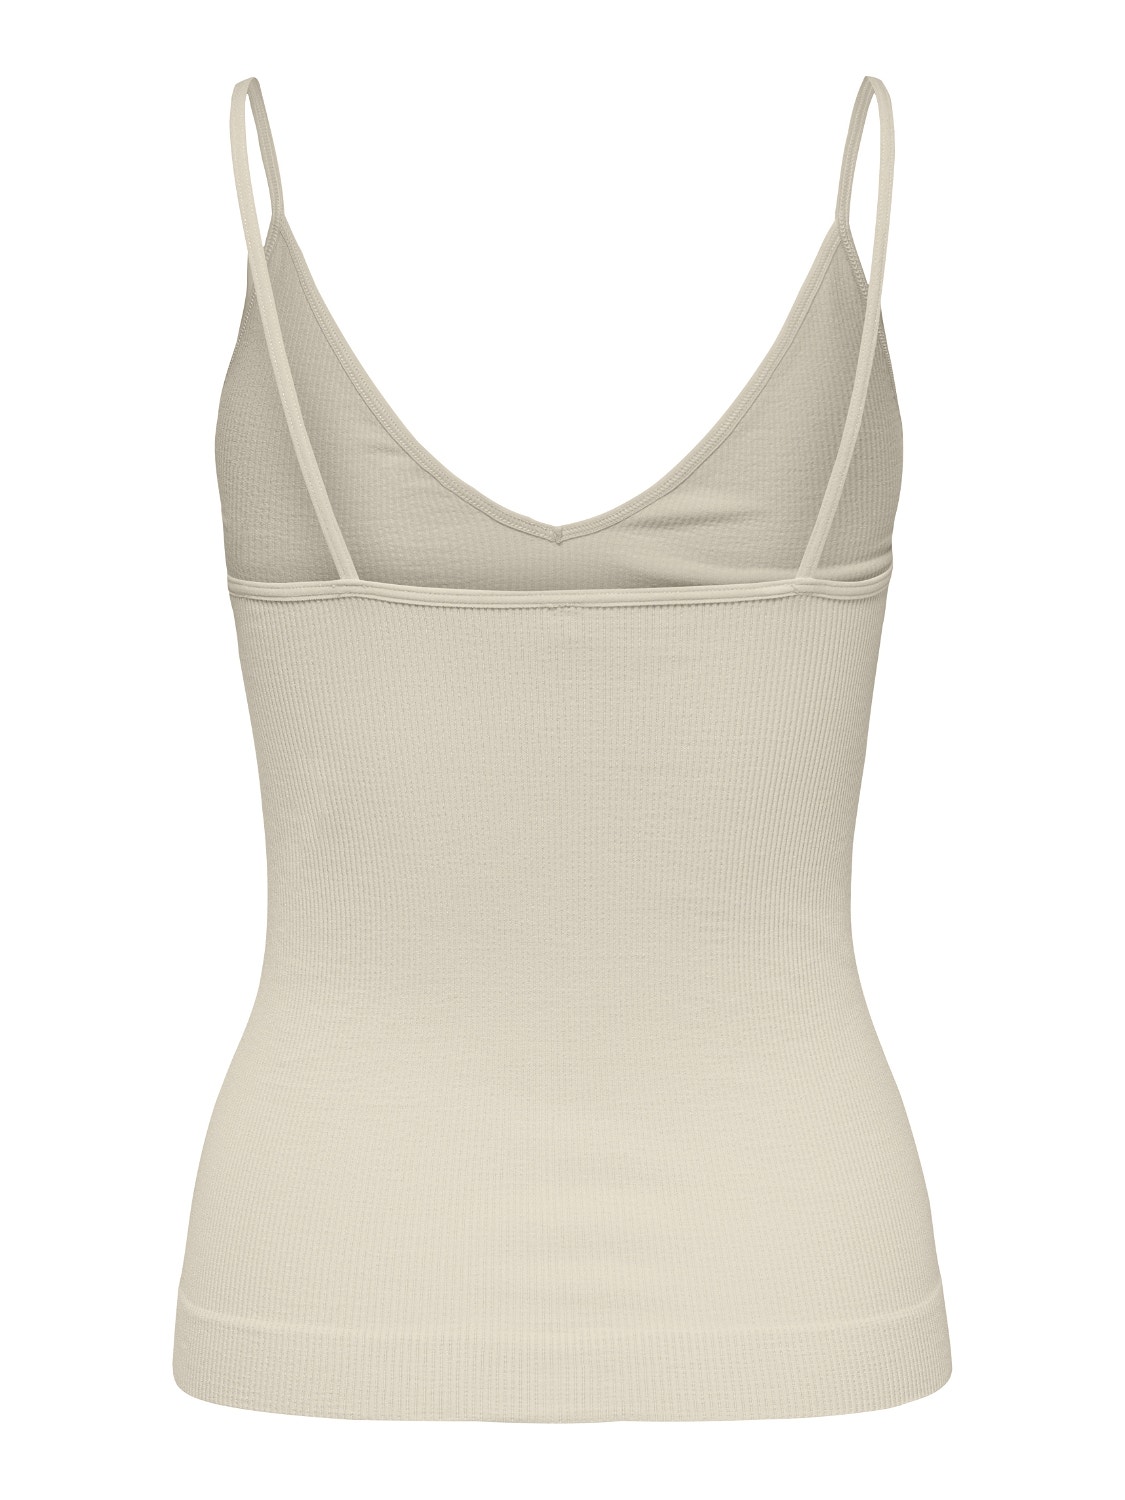 ONLY Seamless rib Cami -Nude - 15213658